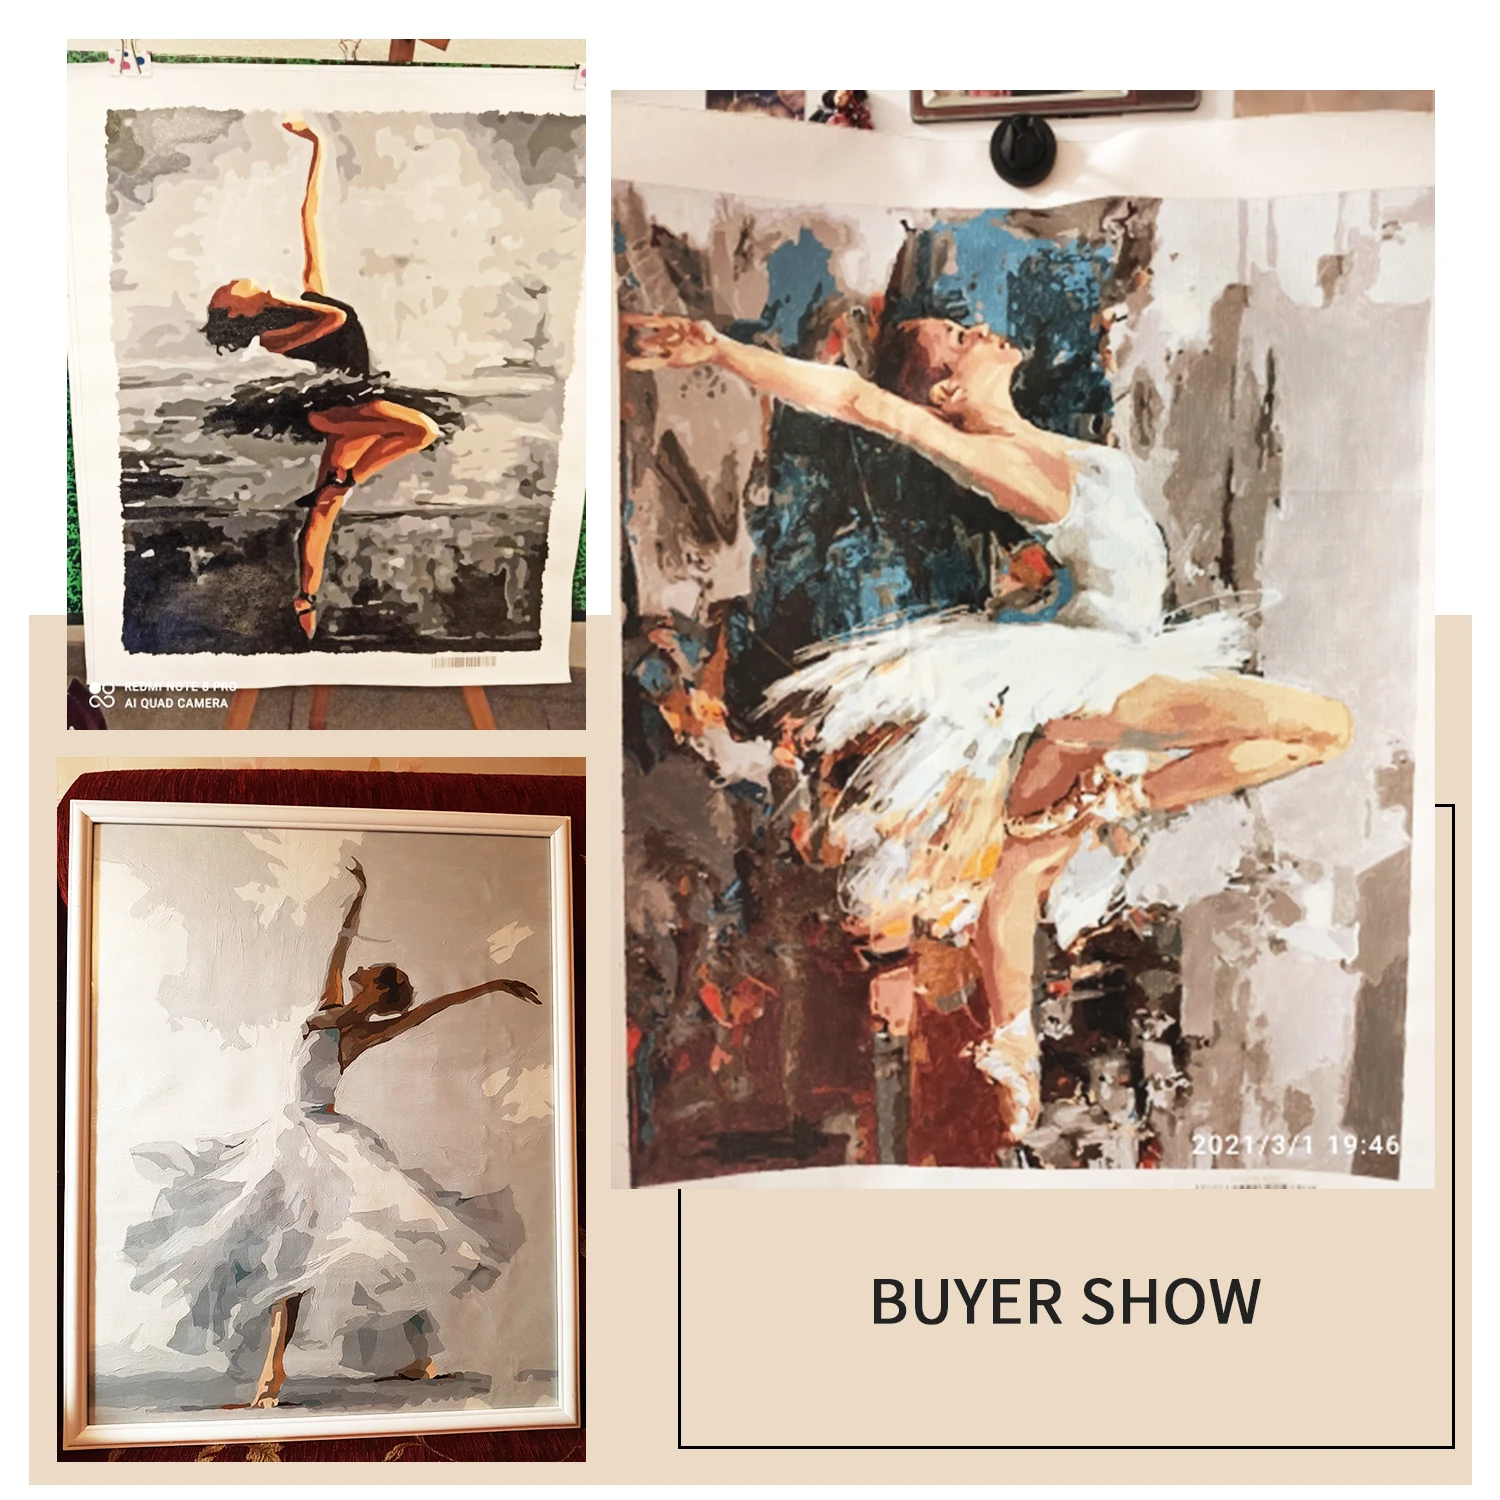 GATYZTORY 60×75cm Diy Frame Ballet Painting By Numbers Canvas Figure Oil Paint By Numbers Handpainted Diy Gift Home Wall DecorPr